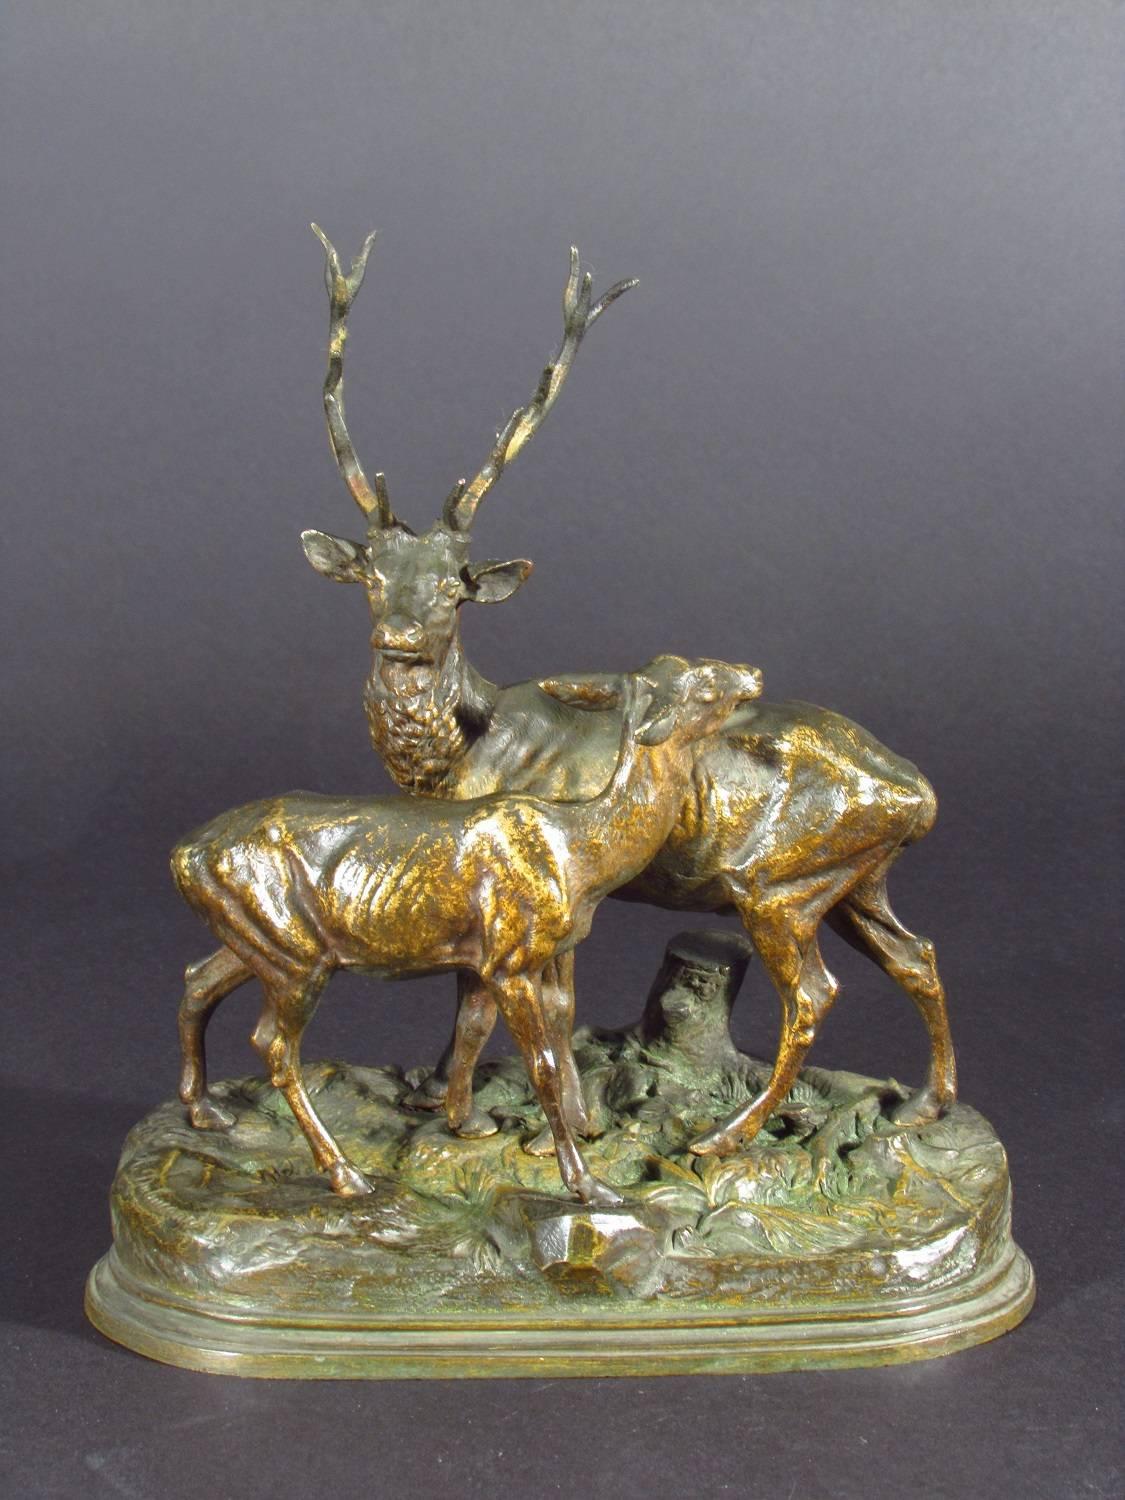 Stag & Doe - Realist Sculpture by Alfred Dubucand